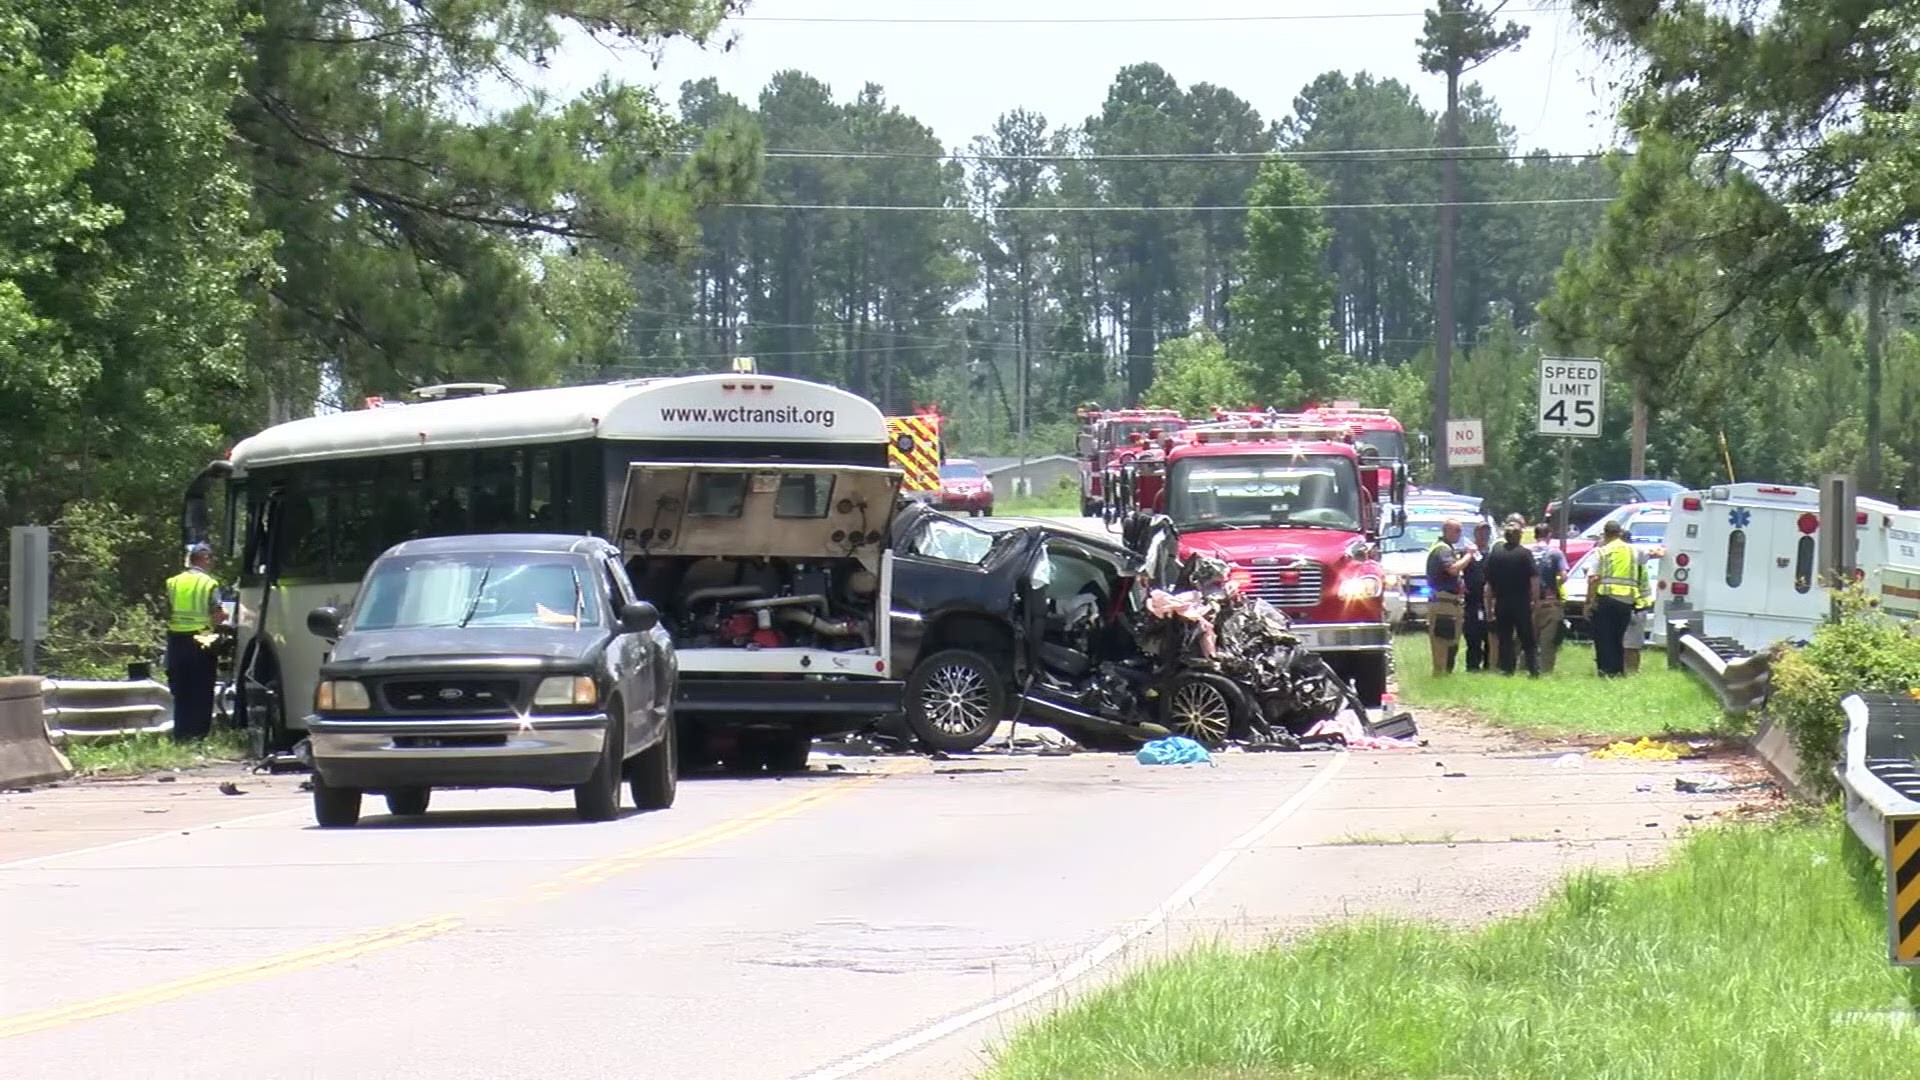 Three people died early Saturday morning when a Williamsburg County Transit bus and an SUV collided early Saturday morning in Georgetown County, South Carolina.